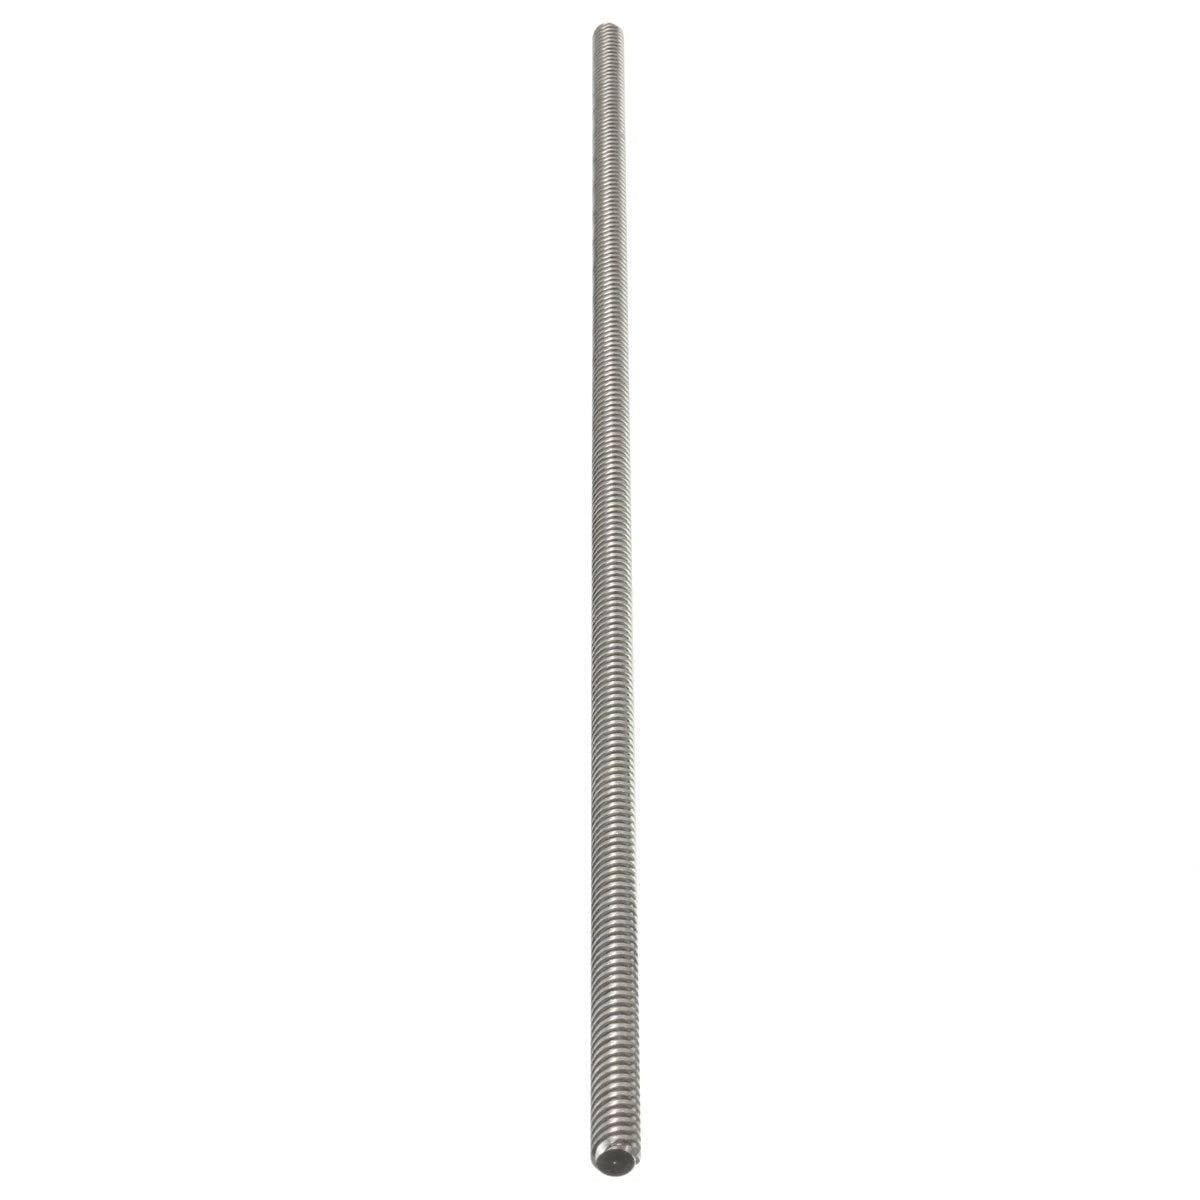 330mm Z-Axis Stainless Steel Threaded Rod Lead Screw with T8 Nut